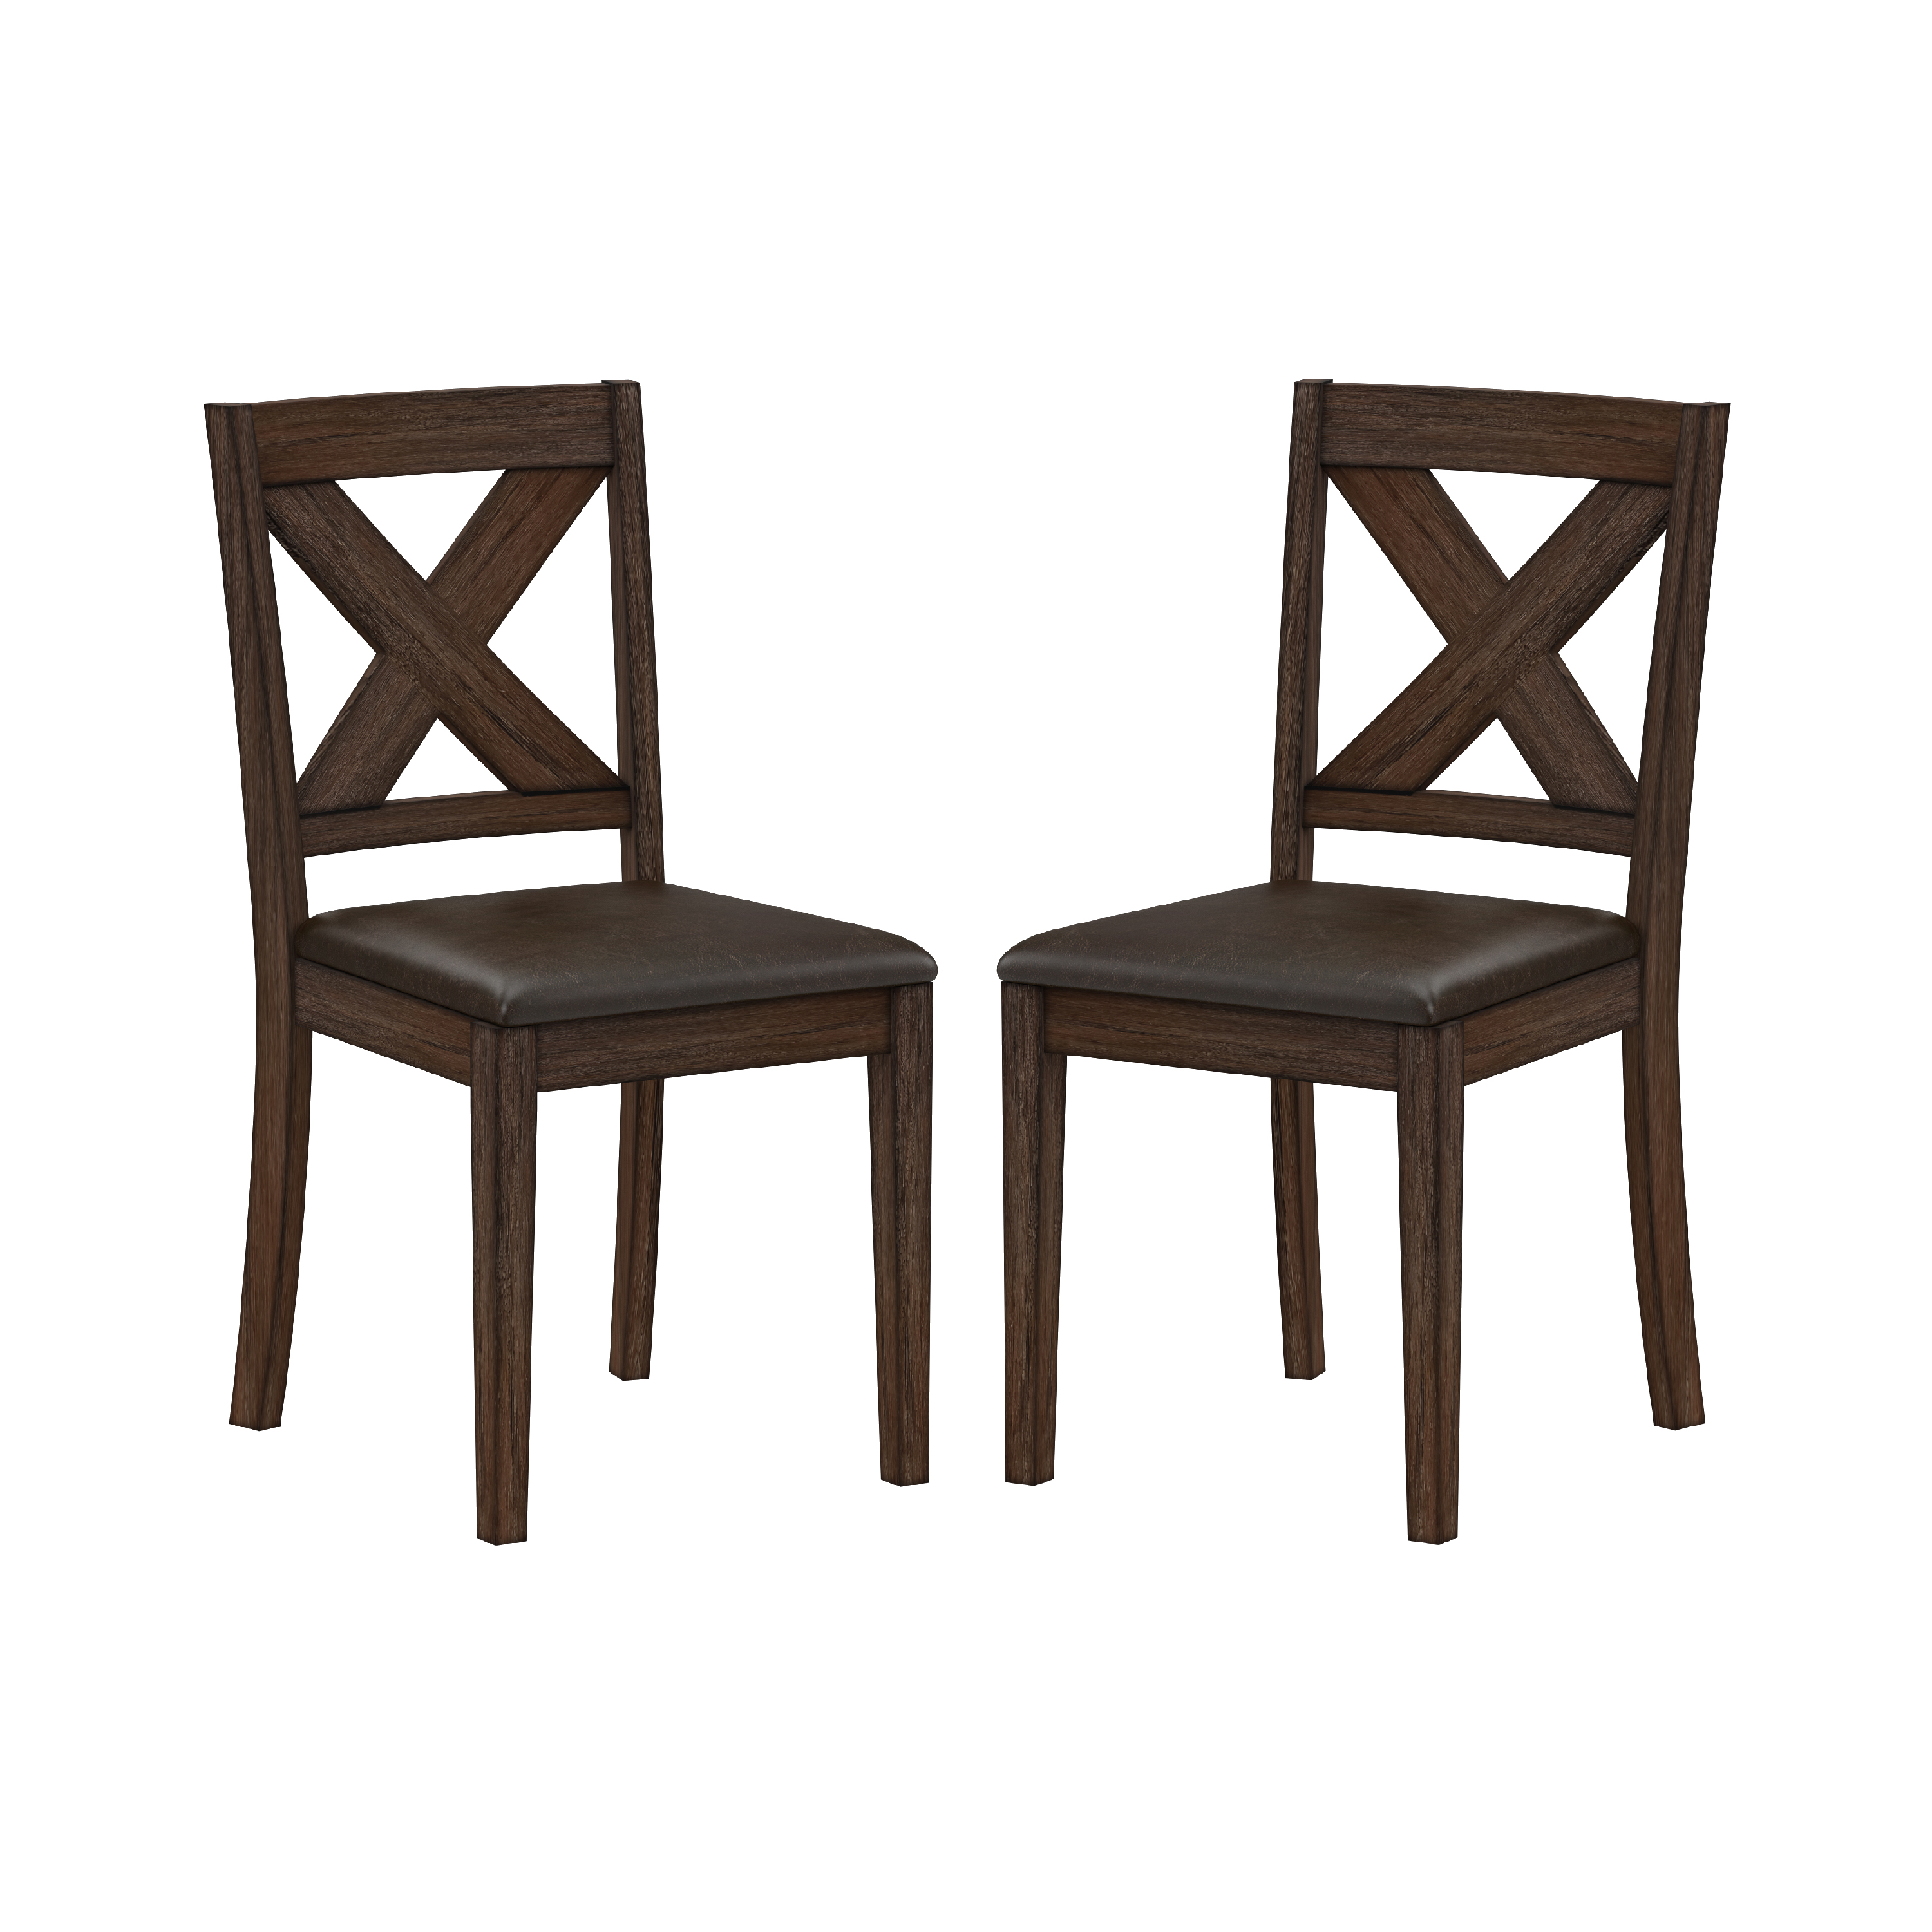 Spencer Wood Dining Chair, Set of 2